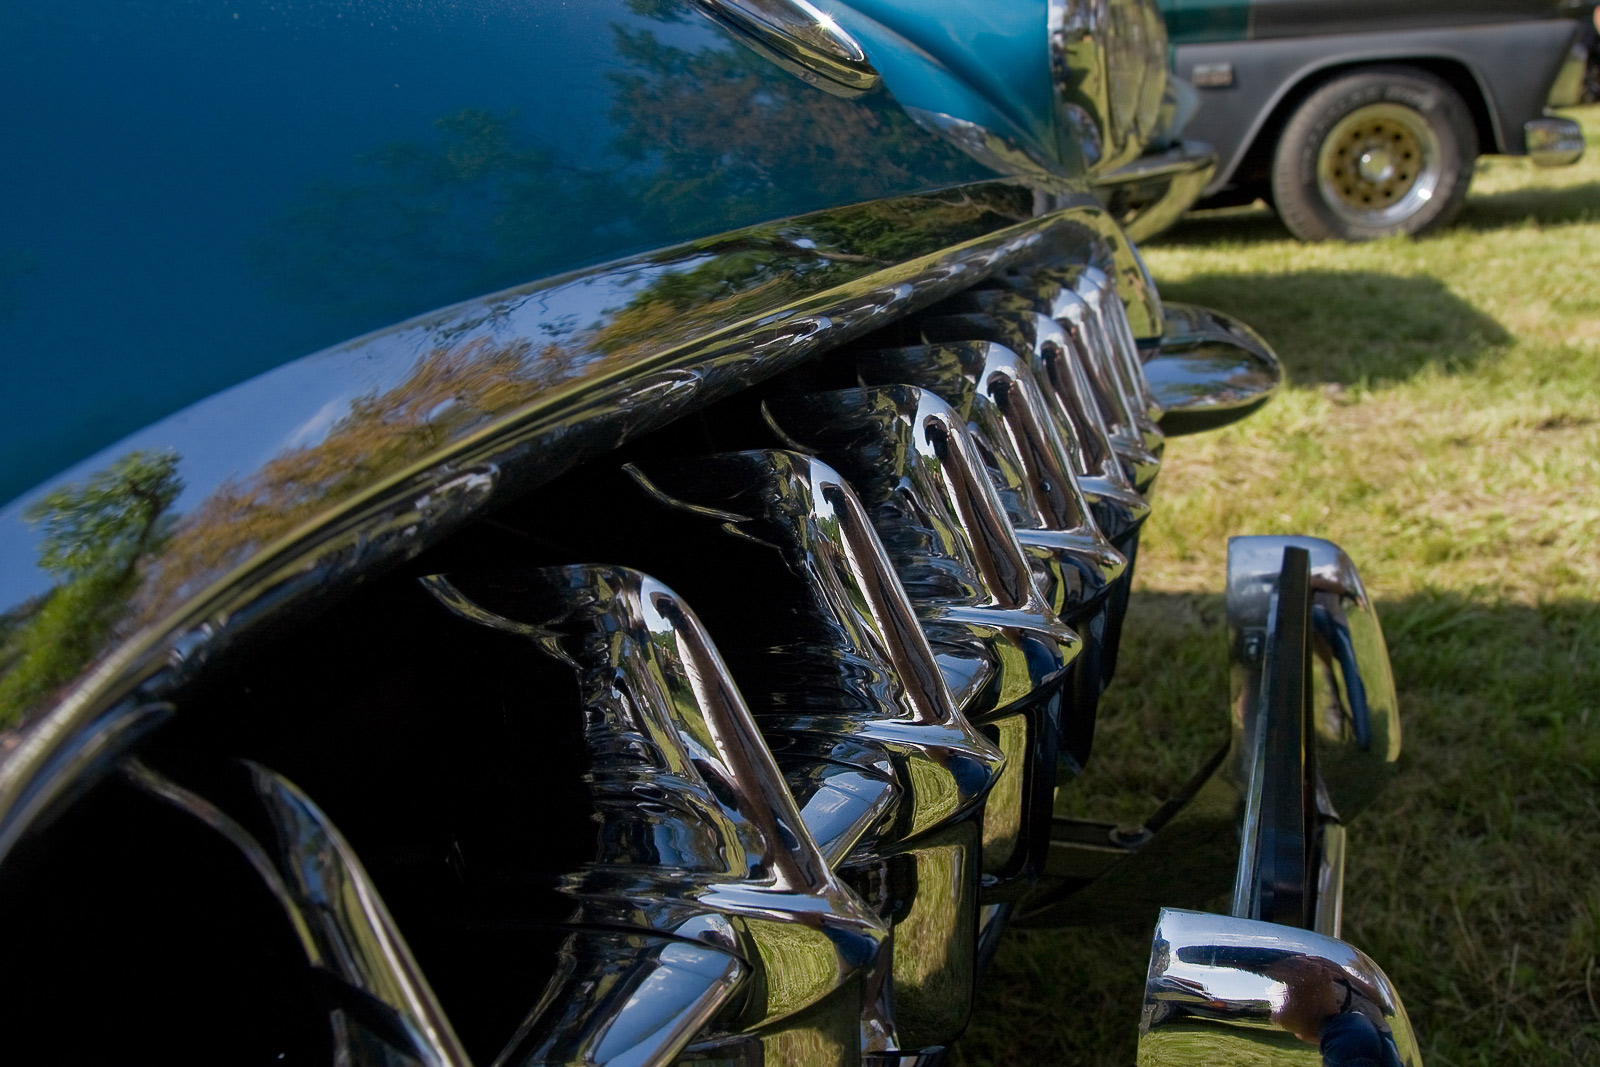 oldtimer grill with light reflections on the surface of the chrome details